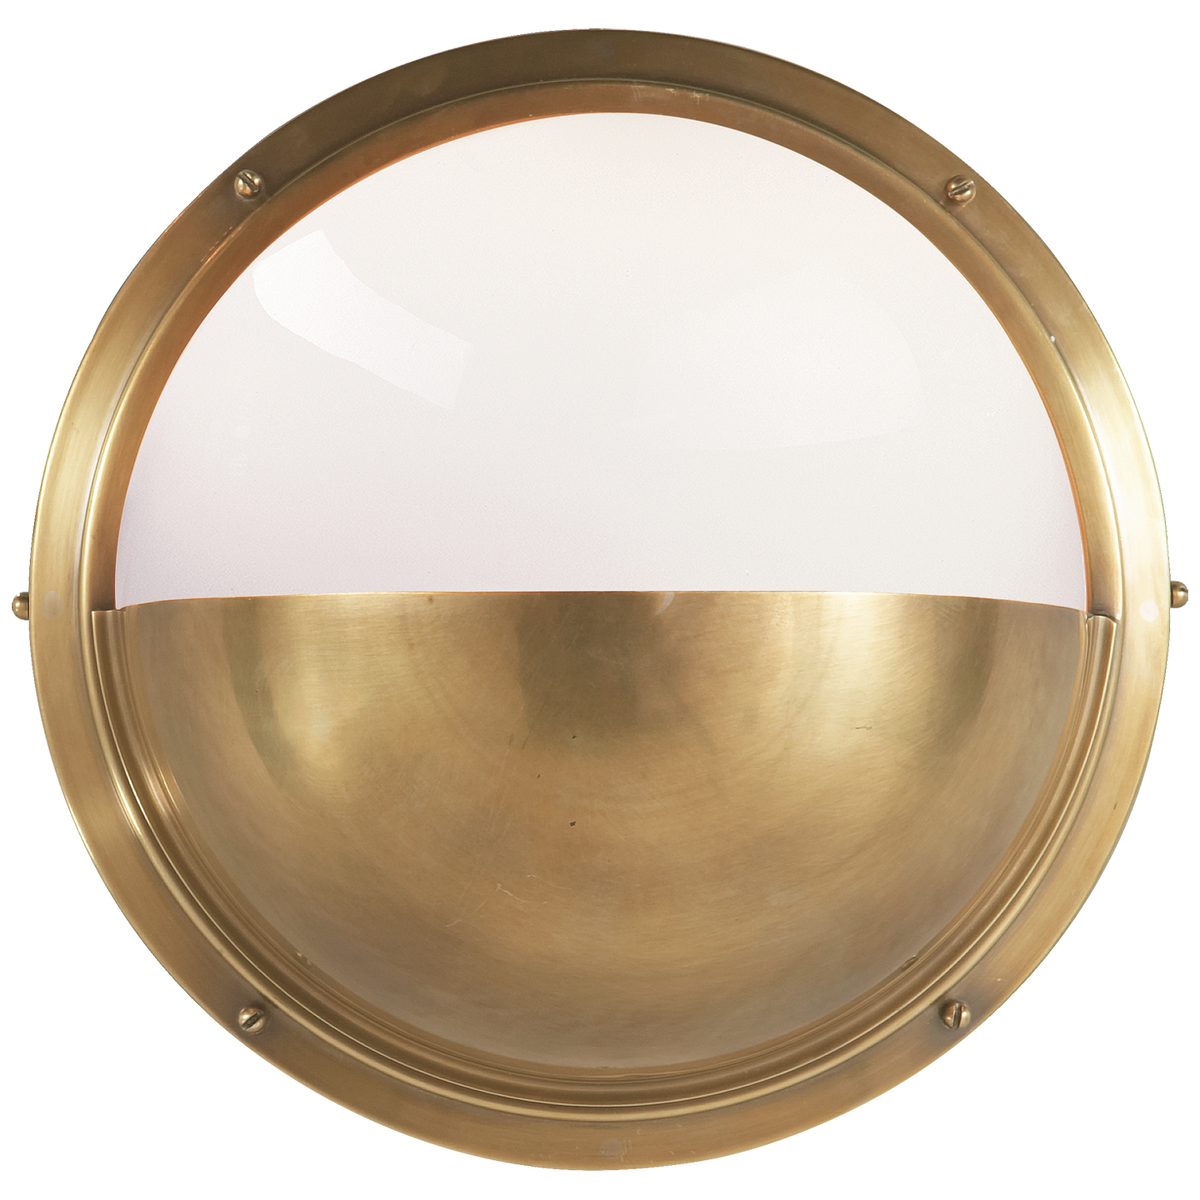 Pelham Moon Light - Hand Rubbed Antique Brass with White Glass